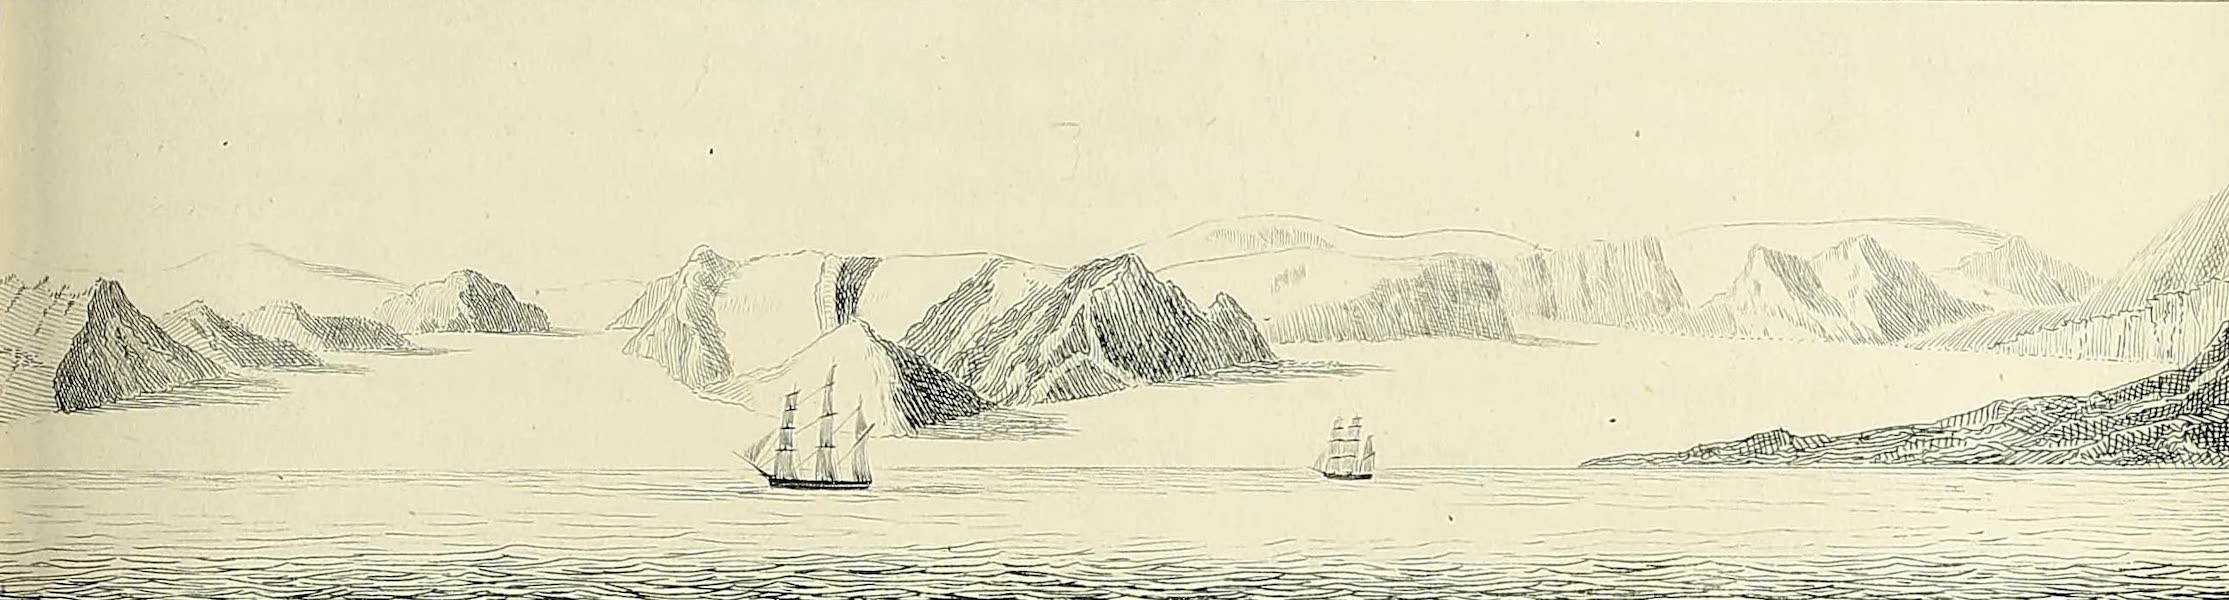 Journal of a Voyage for the Discovery of a North-West Passage - Continuation of the North Shore of Sir James Lancaster's Sound, to the Eastward of C. Warrender (1821)